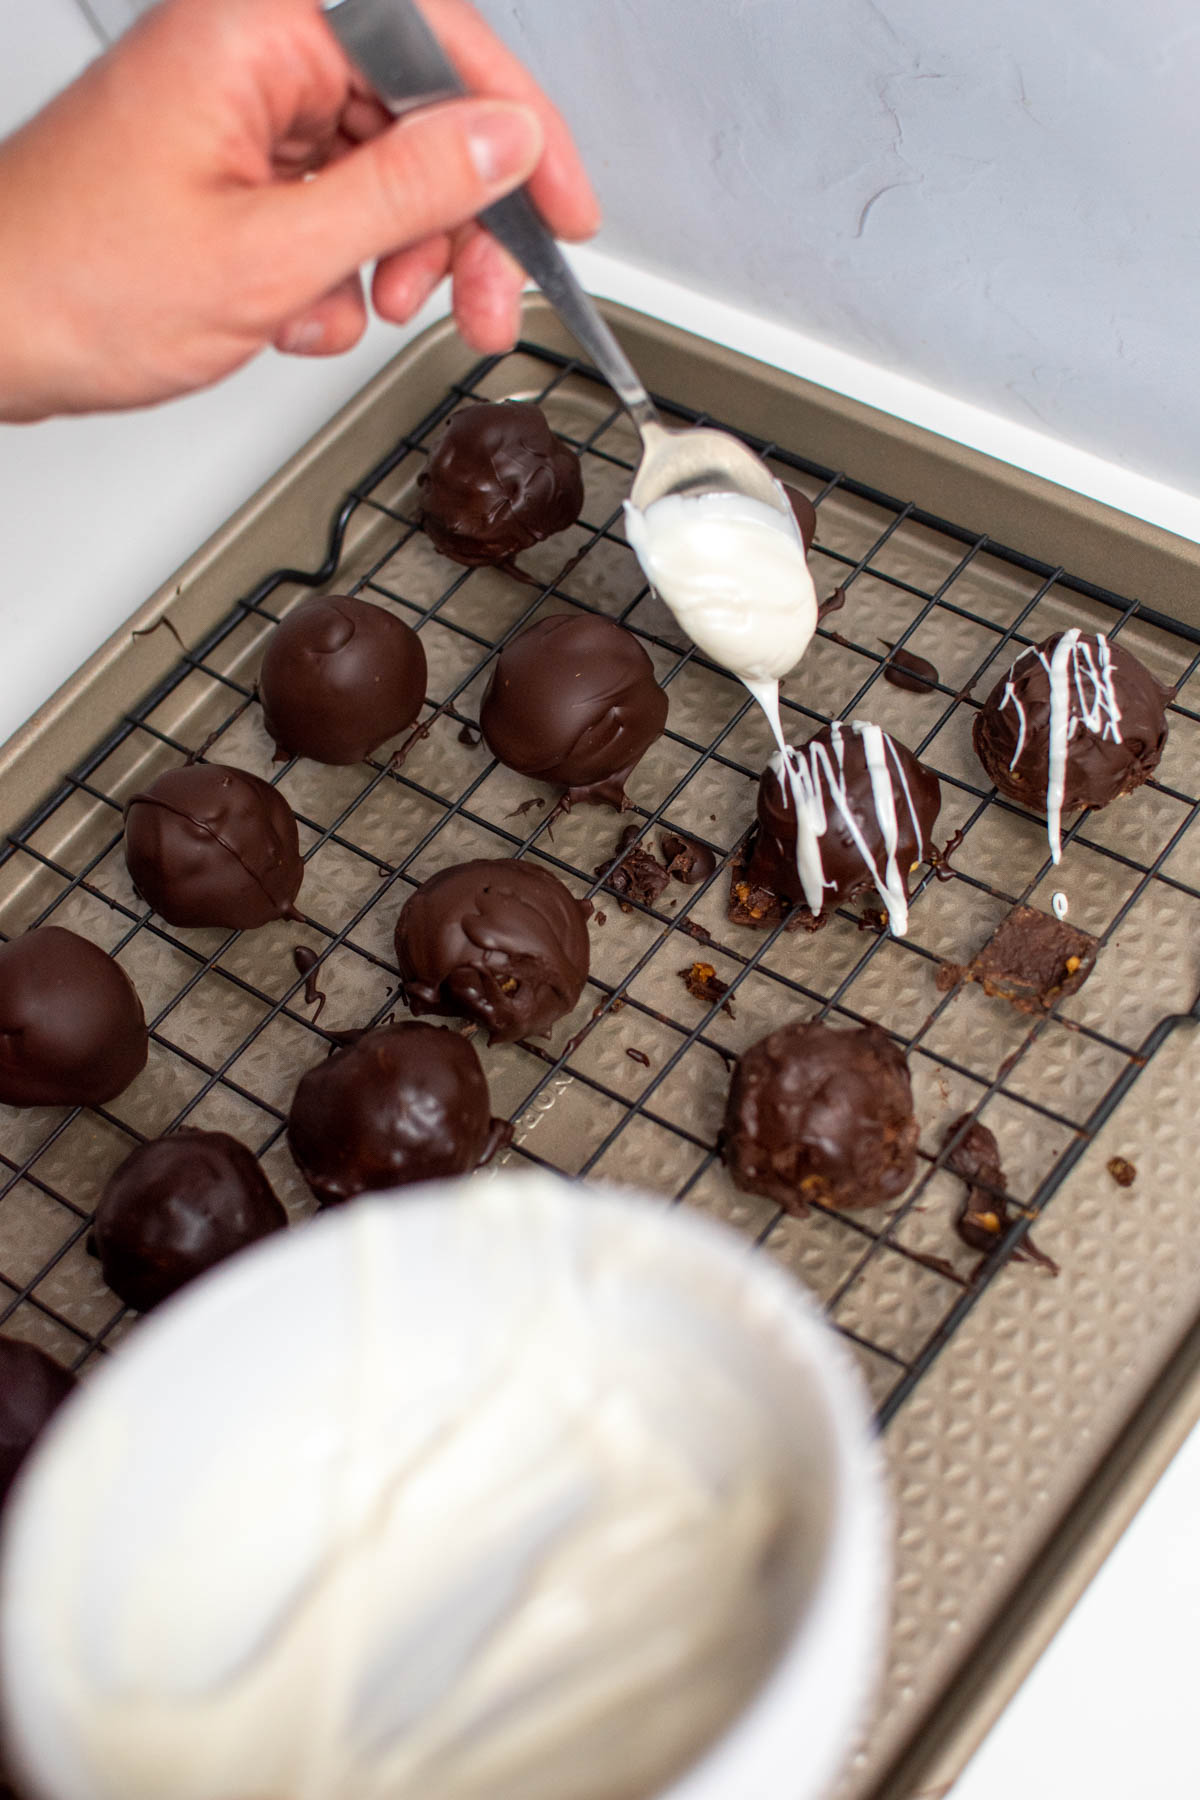 Woman's hand drizzles white chocolate from spoon onto chocolate truffles.